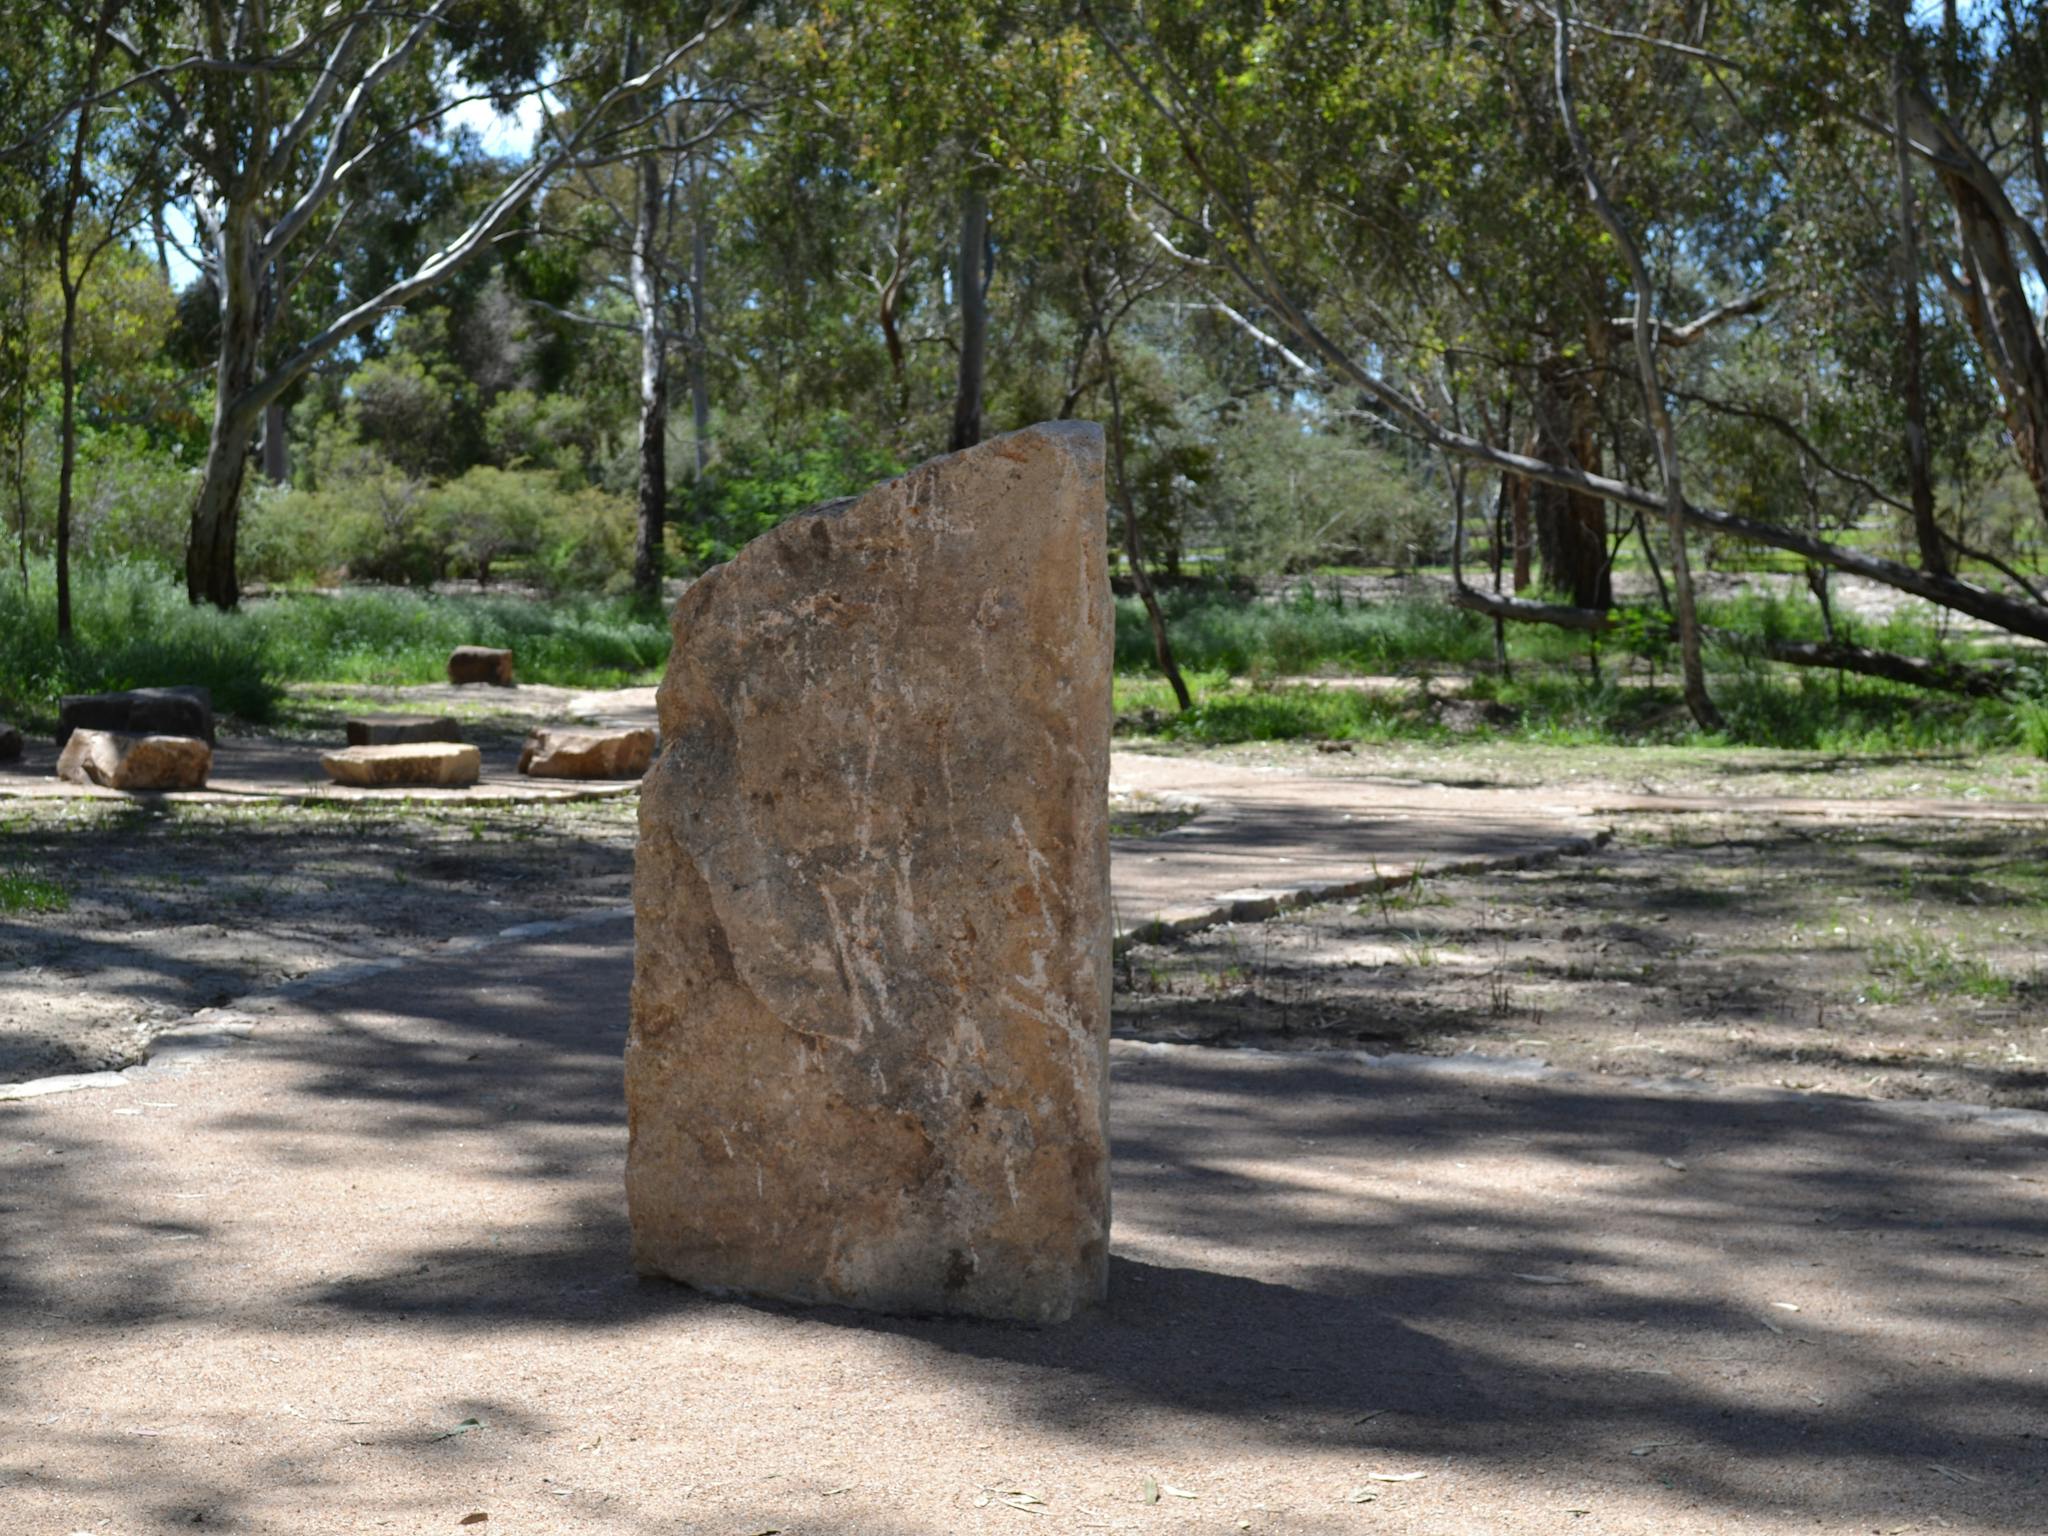 Quiet and time to reflect at the Benalla Aboriginal Gardens